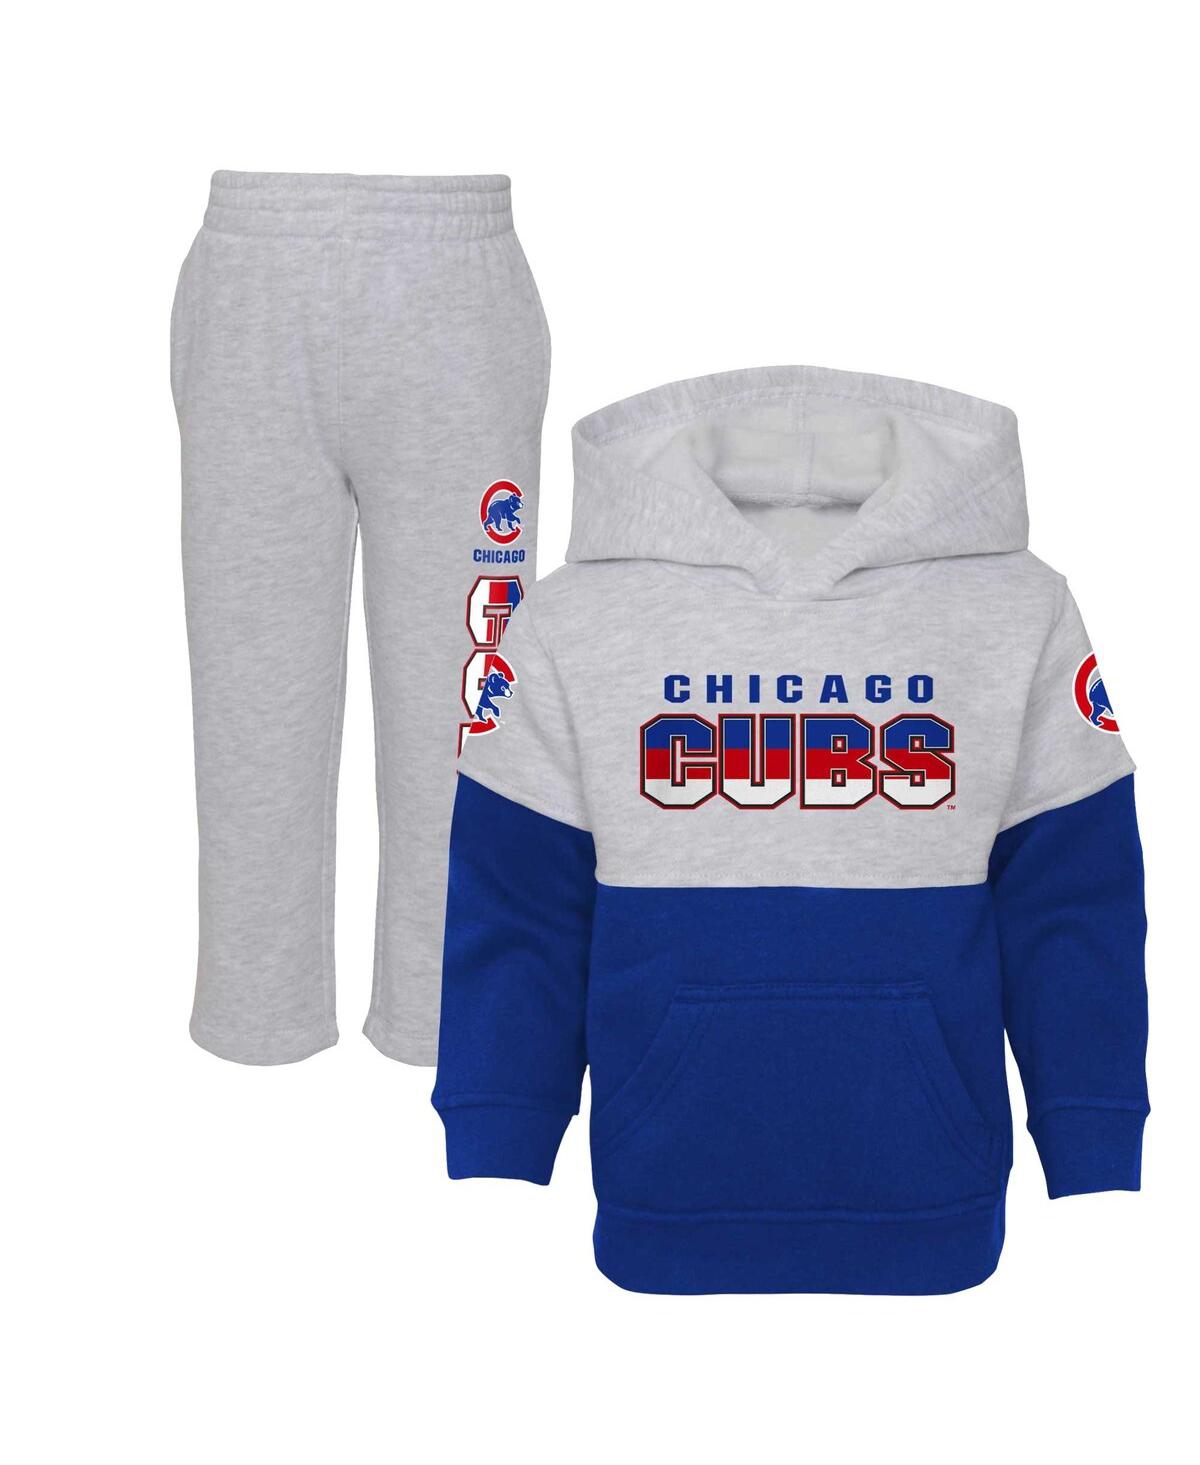 Shop Outerstuff Toddler Boys And Girls Royal, Heather Gray Chicago Cubs Two-piece Playmaker Set In Royal,heather Gray